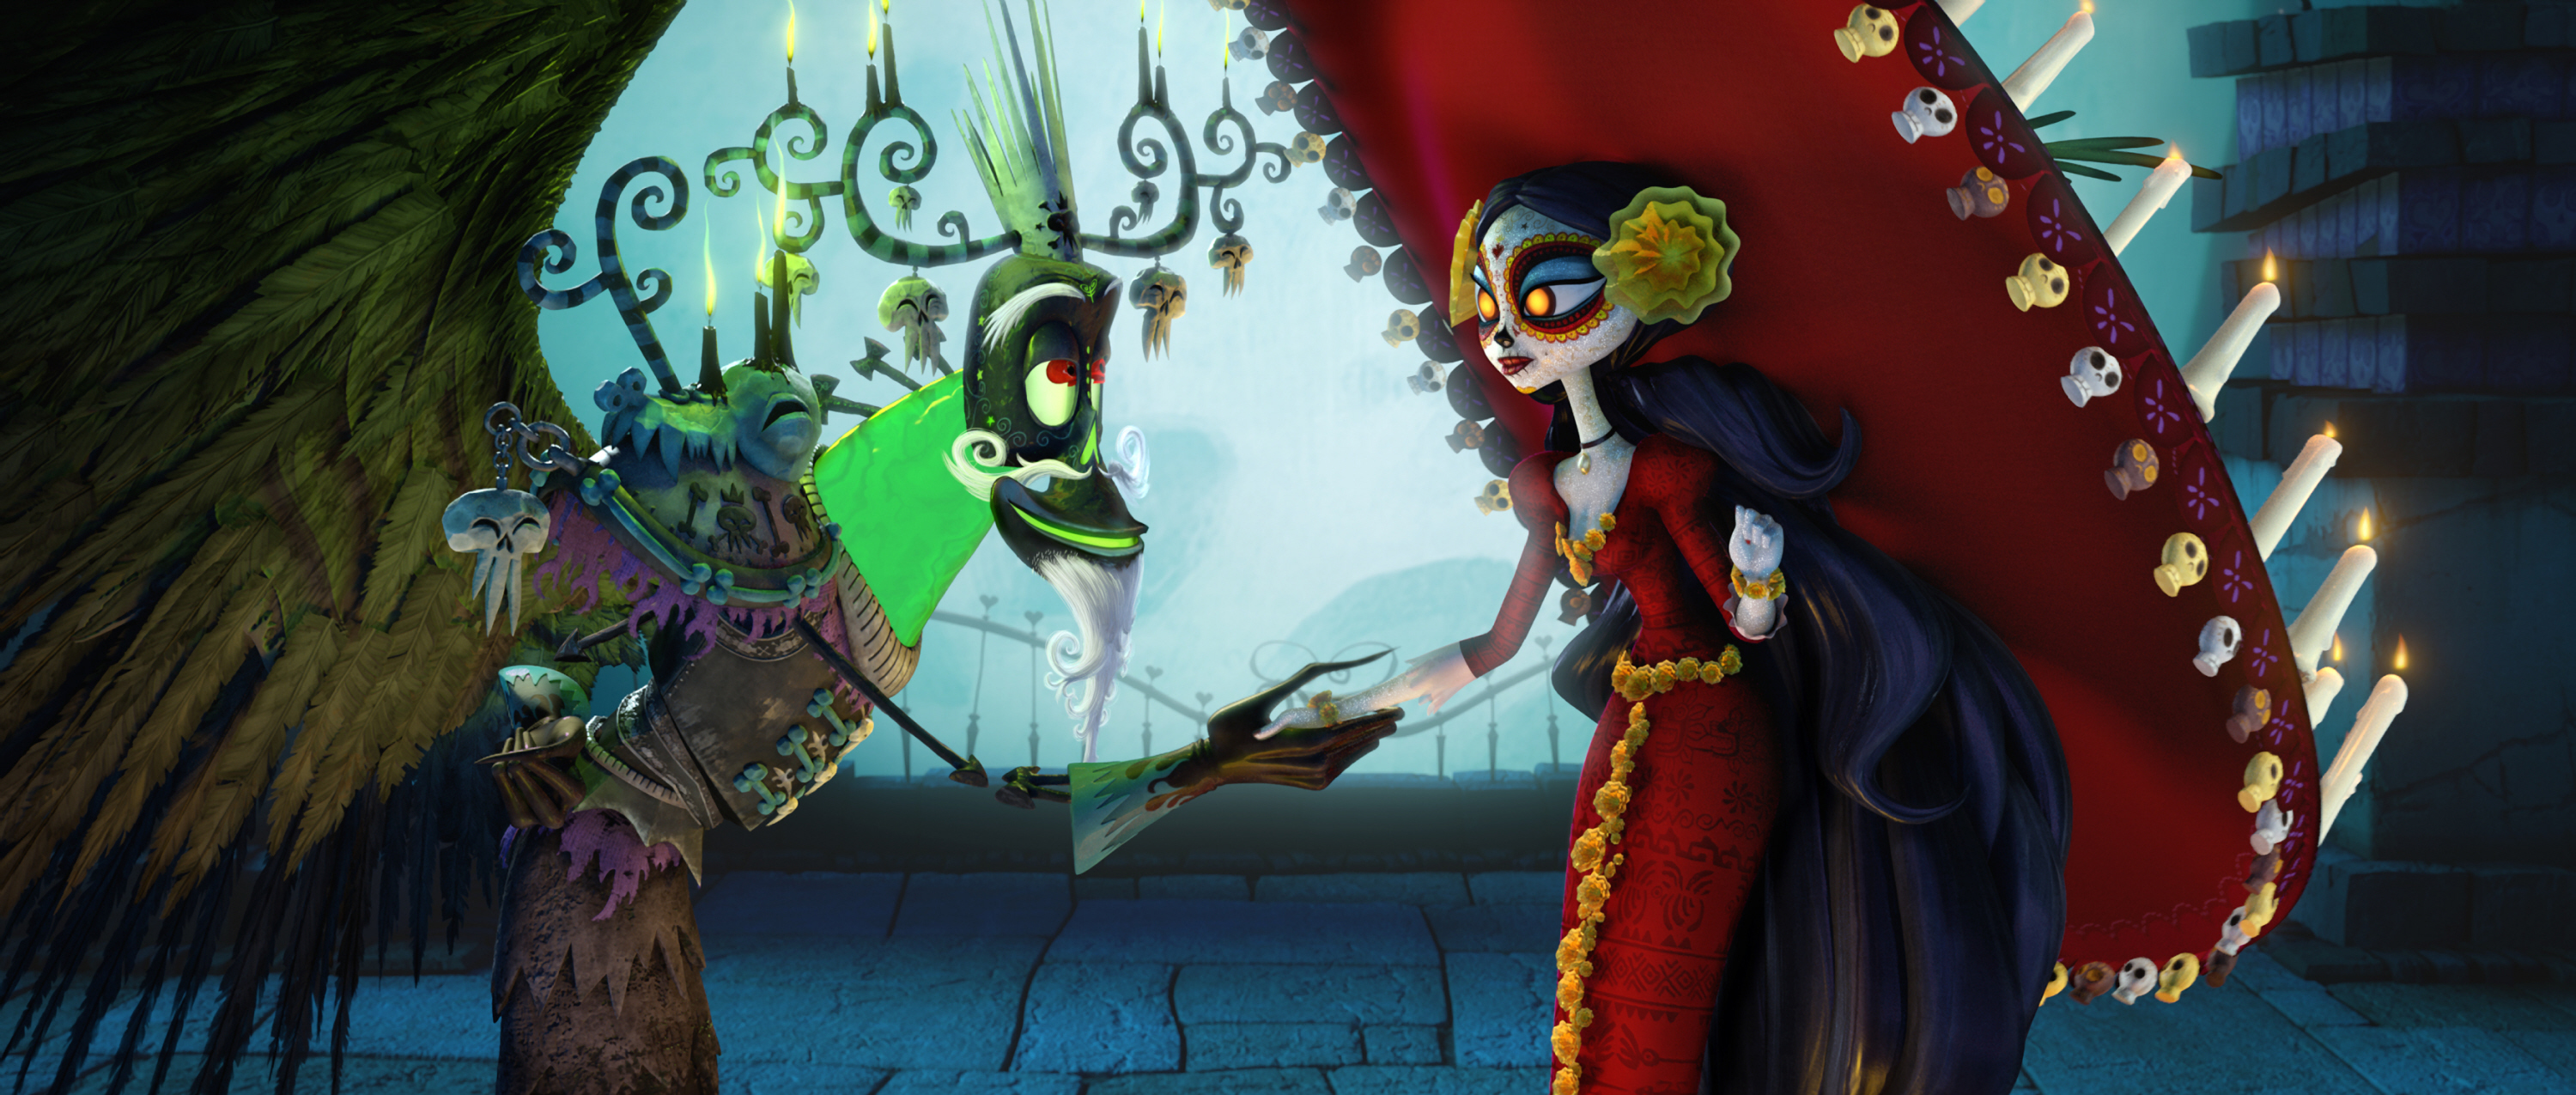 Scene from The Book of Life.